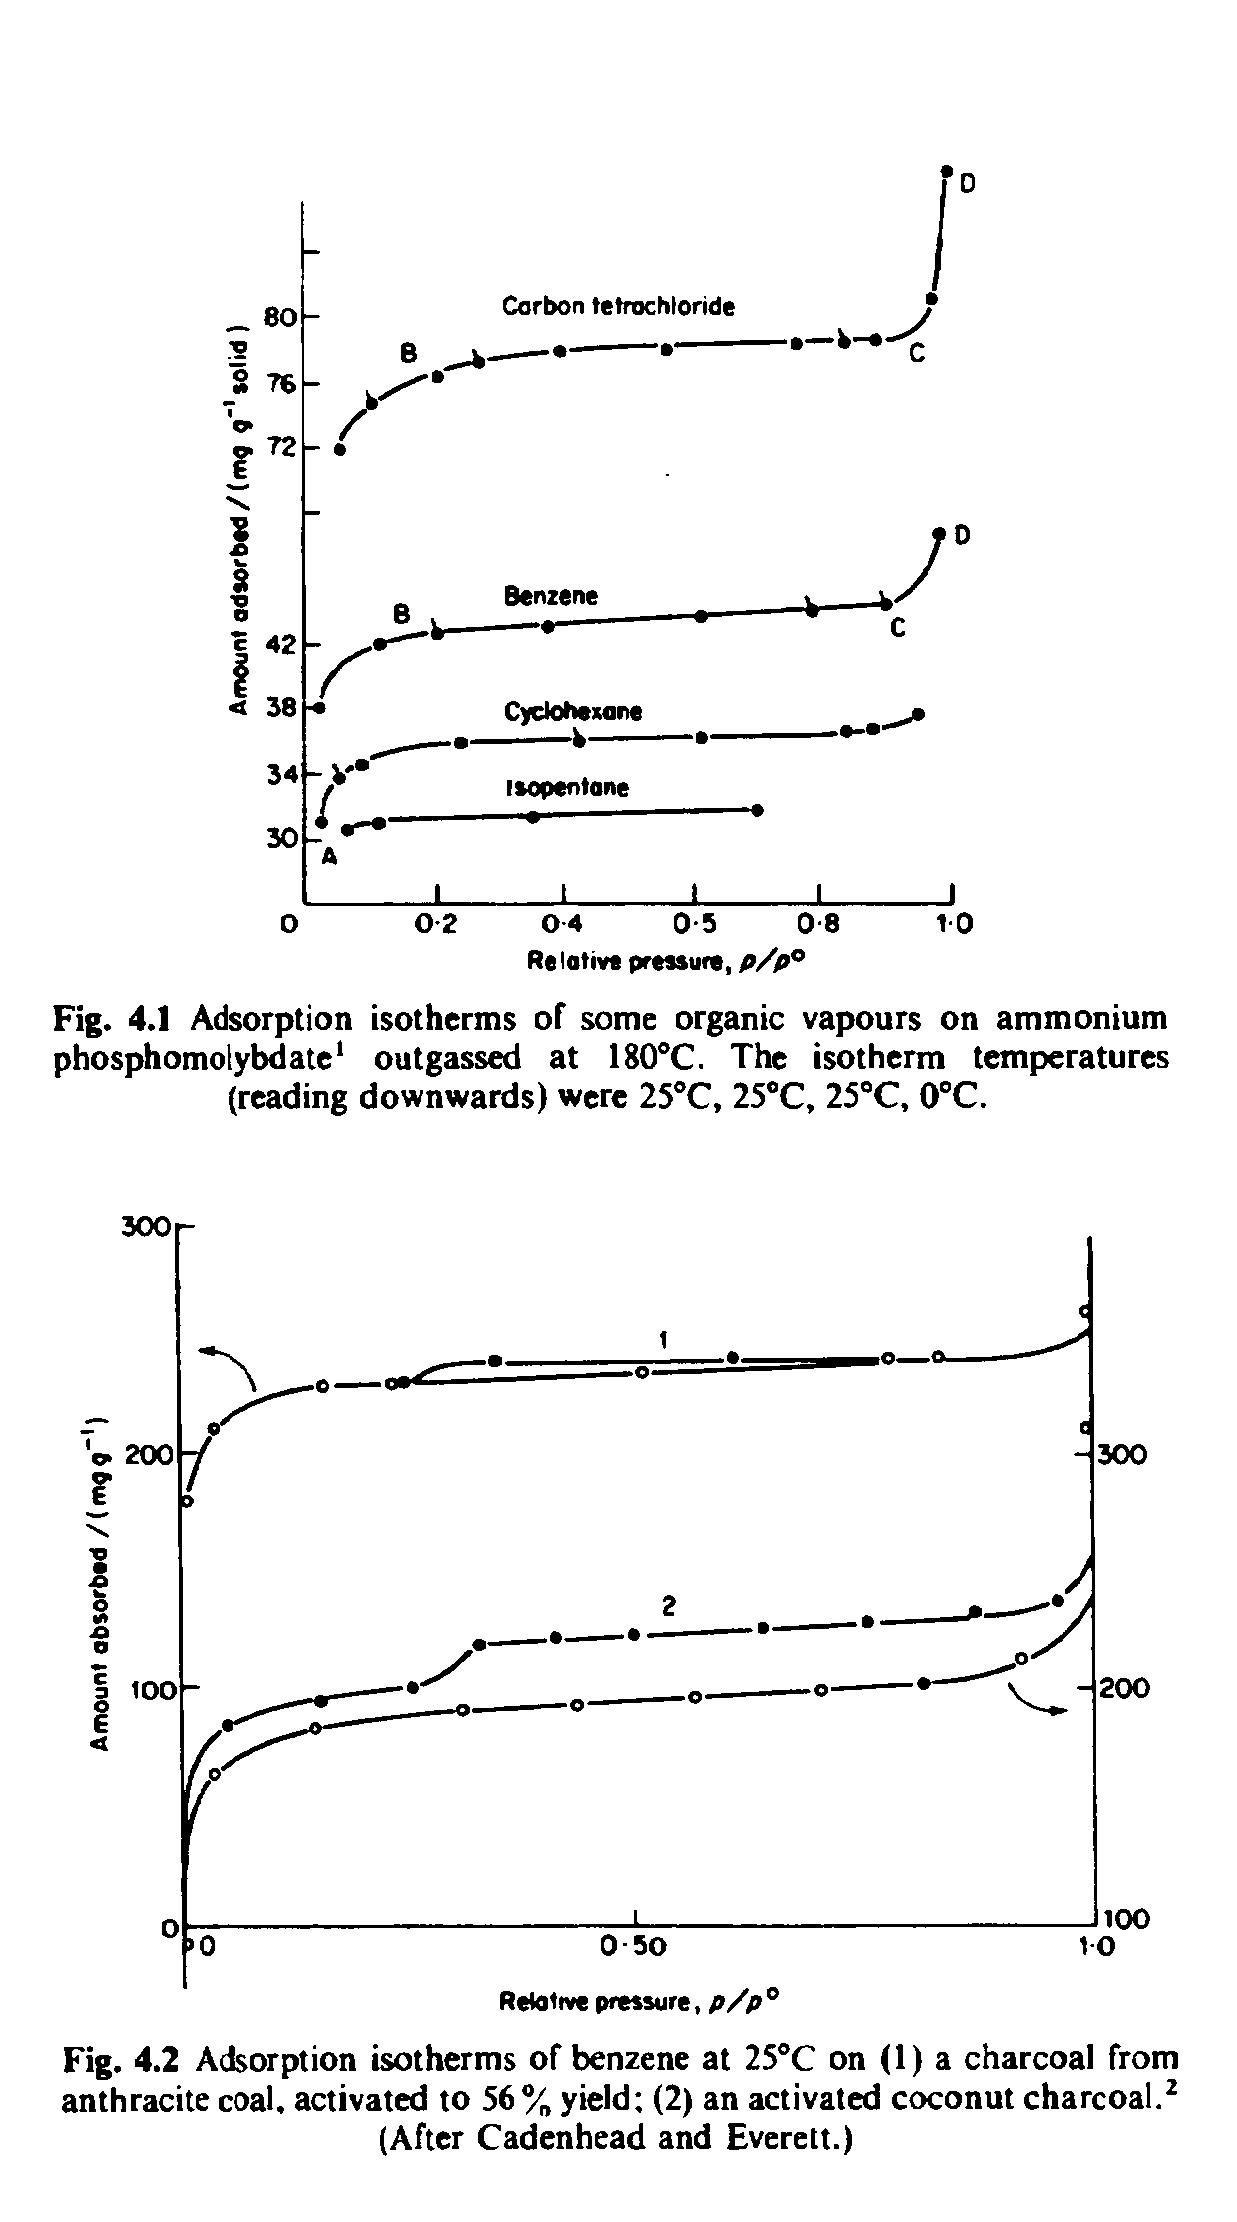 Fig. 4.1 Adsorption isotherms of some organic vapours on ammonium phosphomolybdate outgassed at 180°C. The isotherm temperatures (reading downwards) were 25°C, 25°C, 25°C, 0°C.